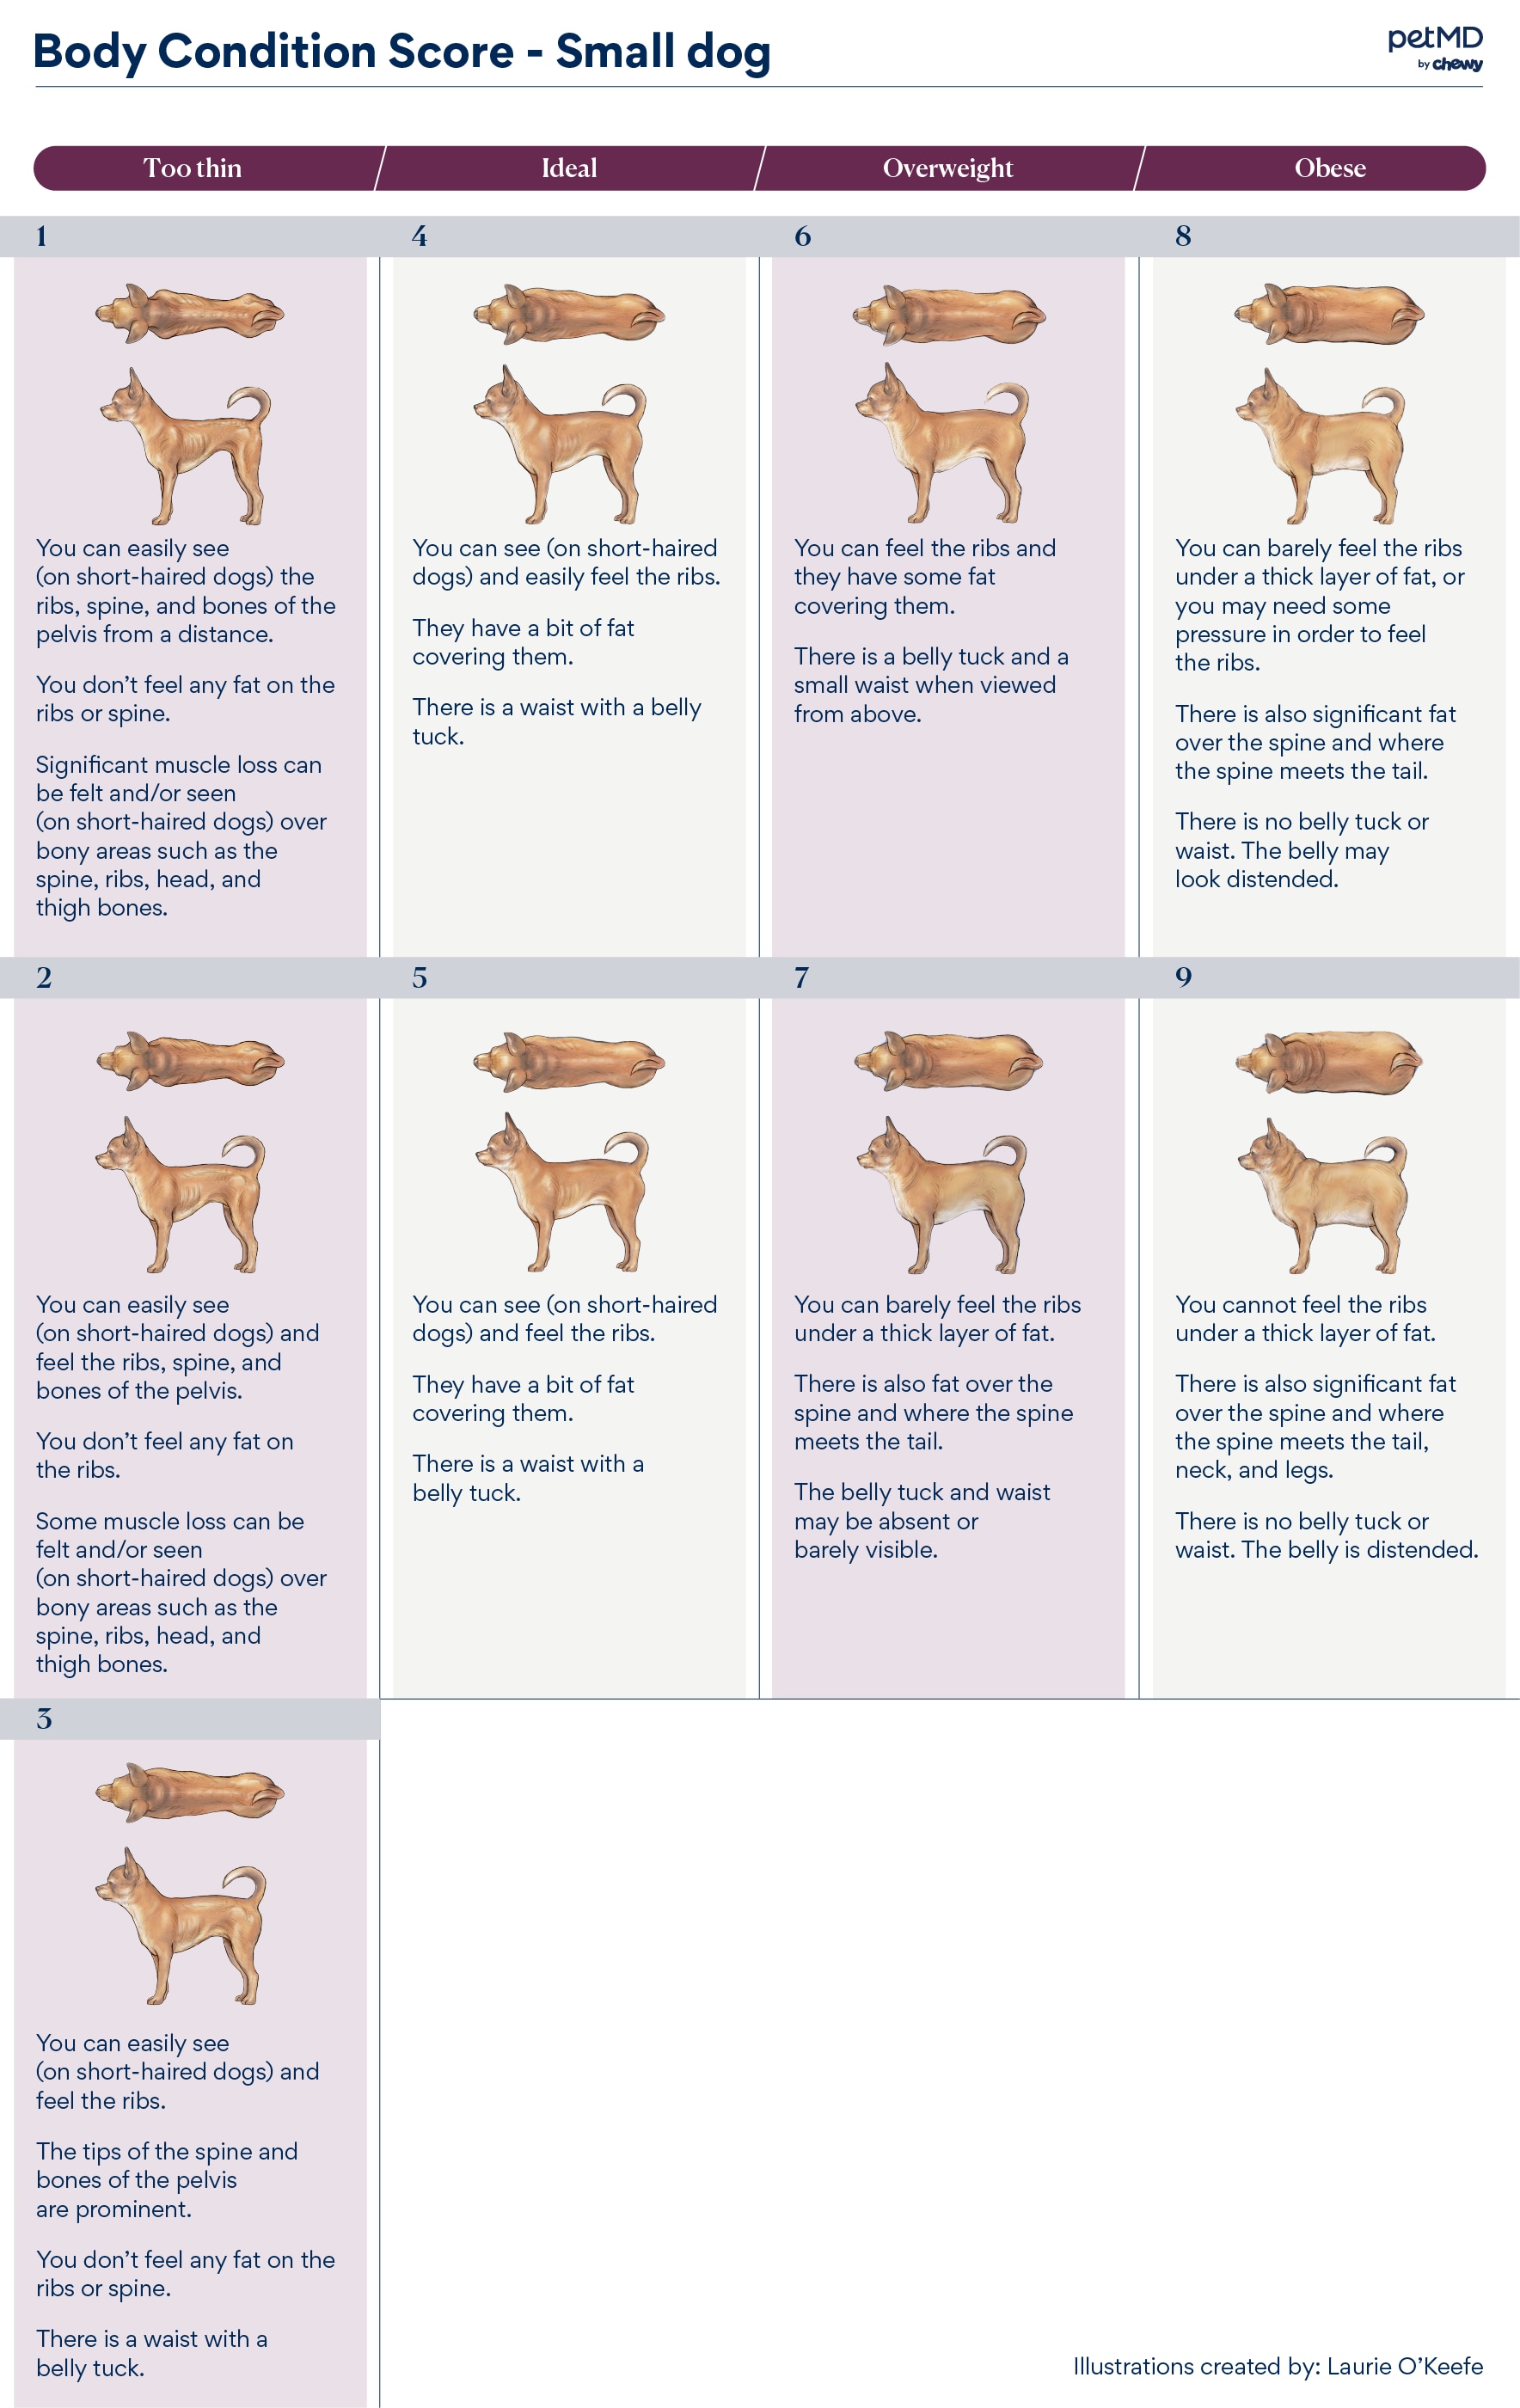 body condition score chart for small breed dogs